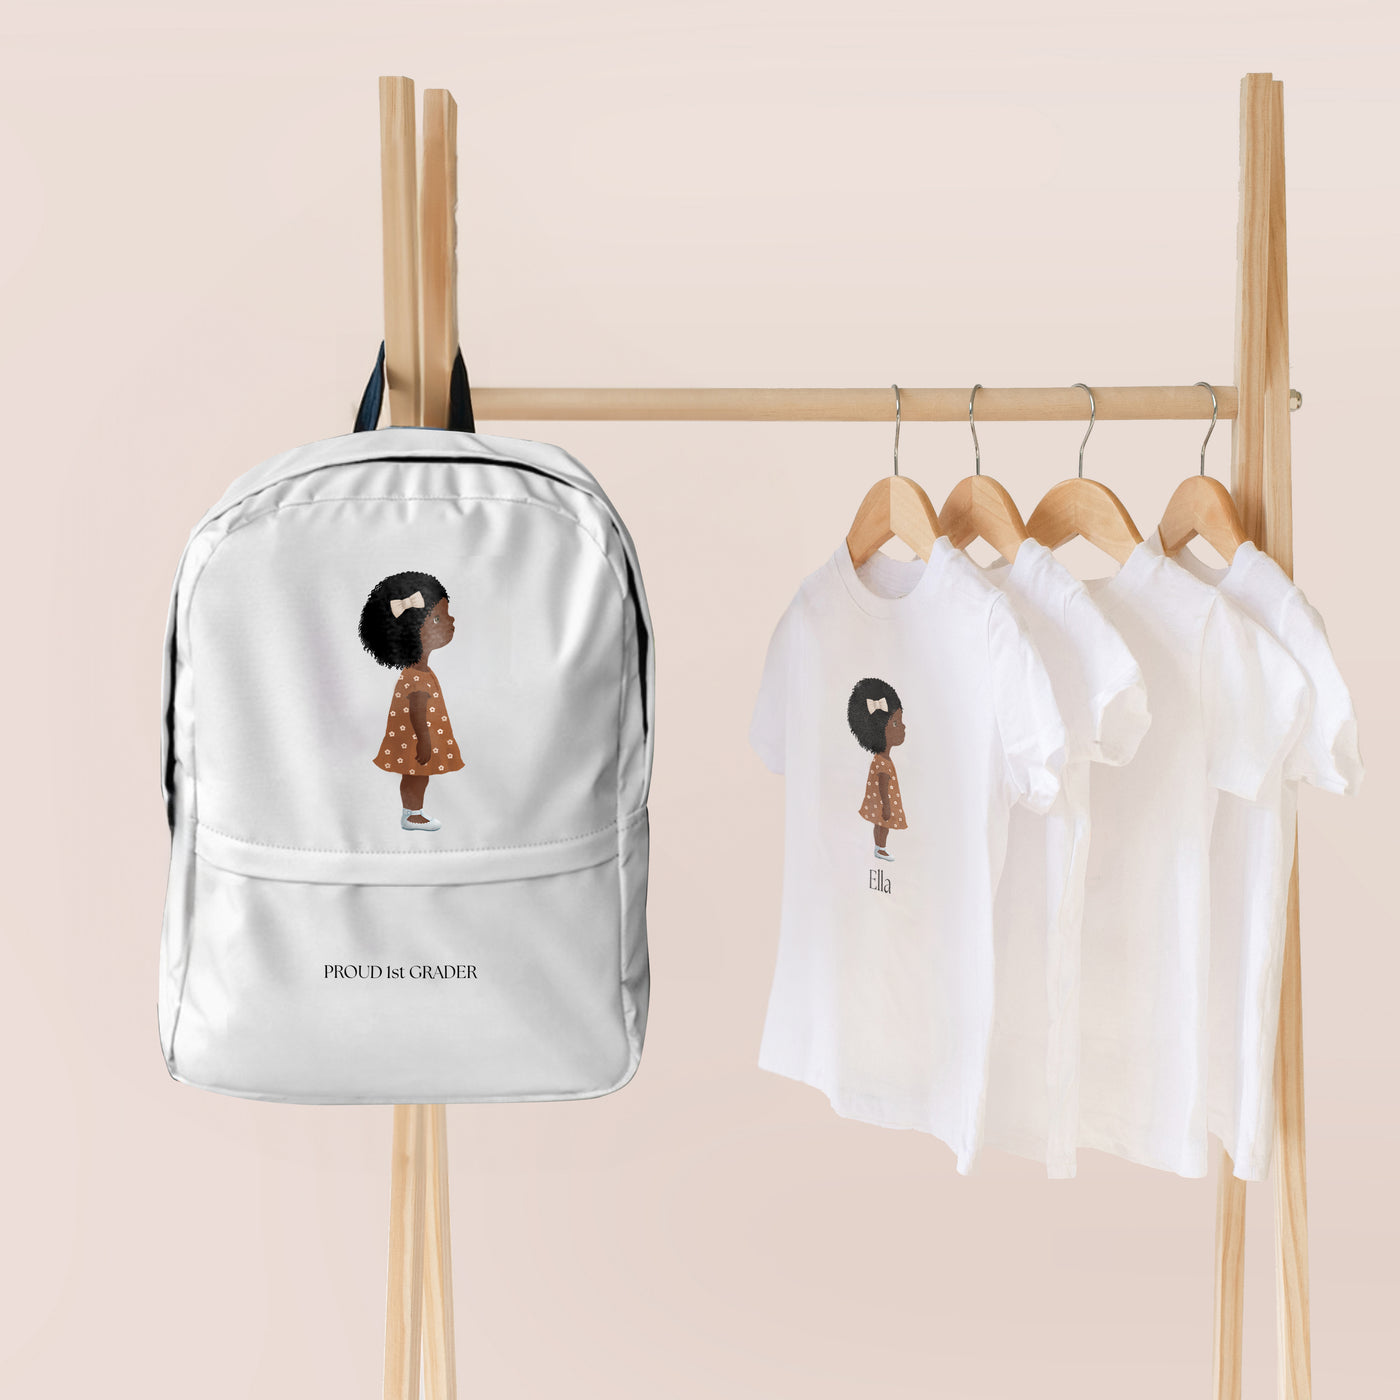 Personalized Backpack + T-shirt Bundle | Back to School